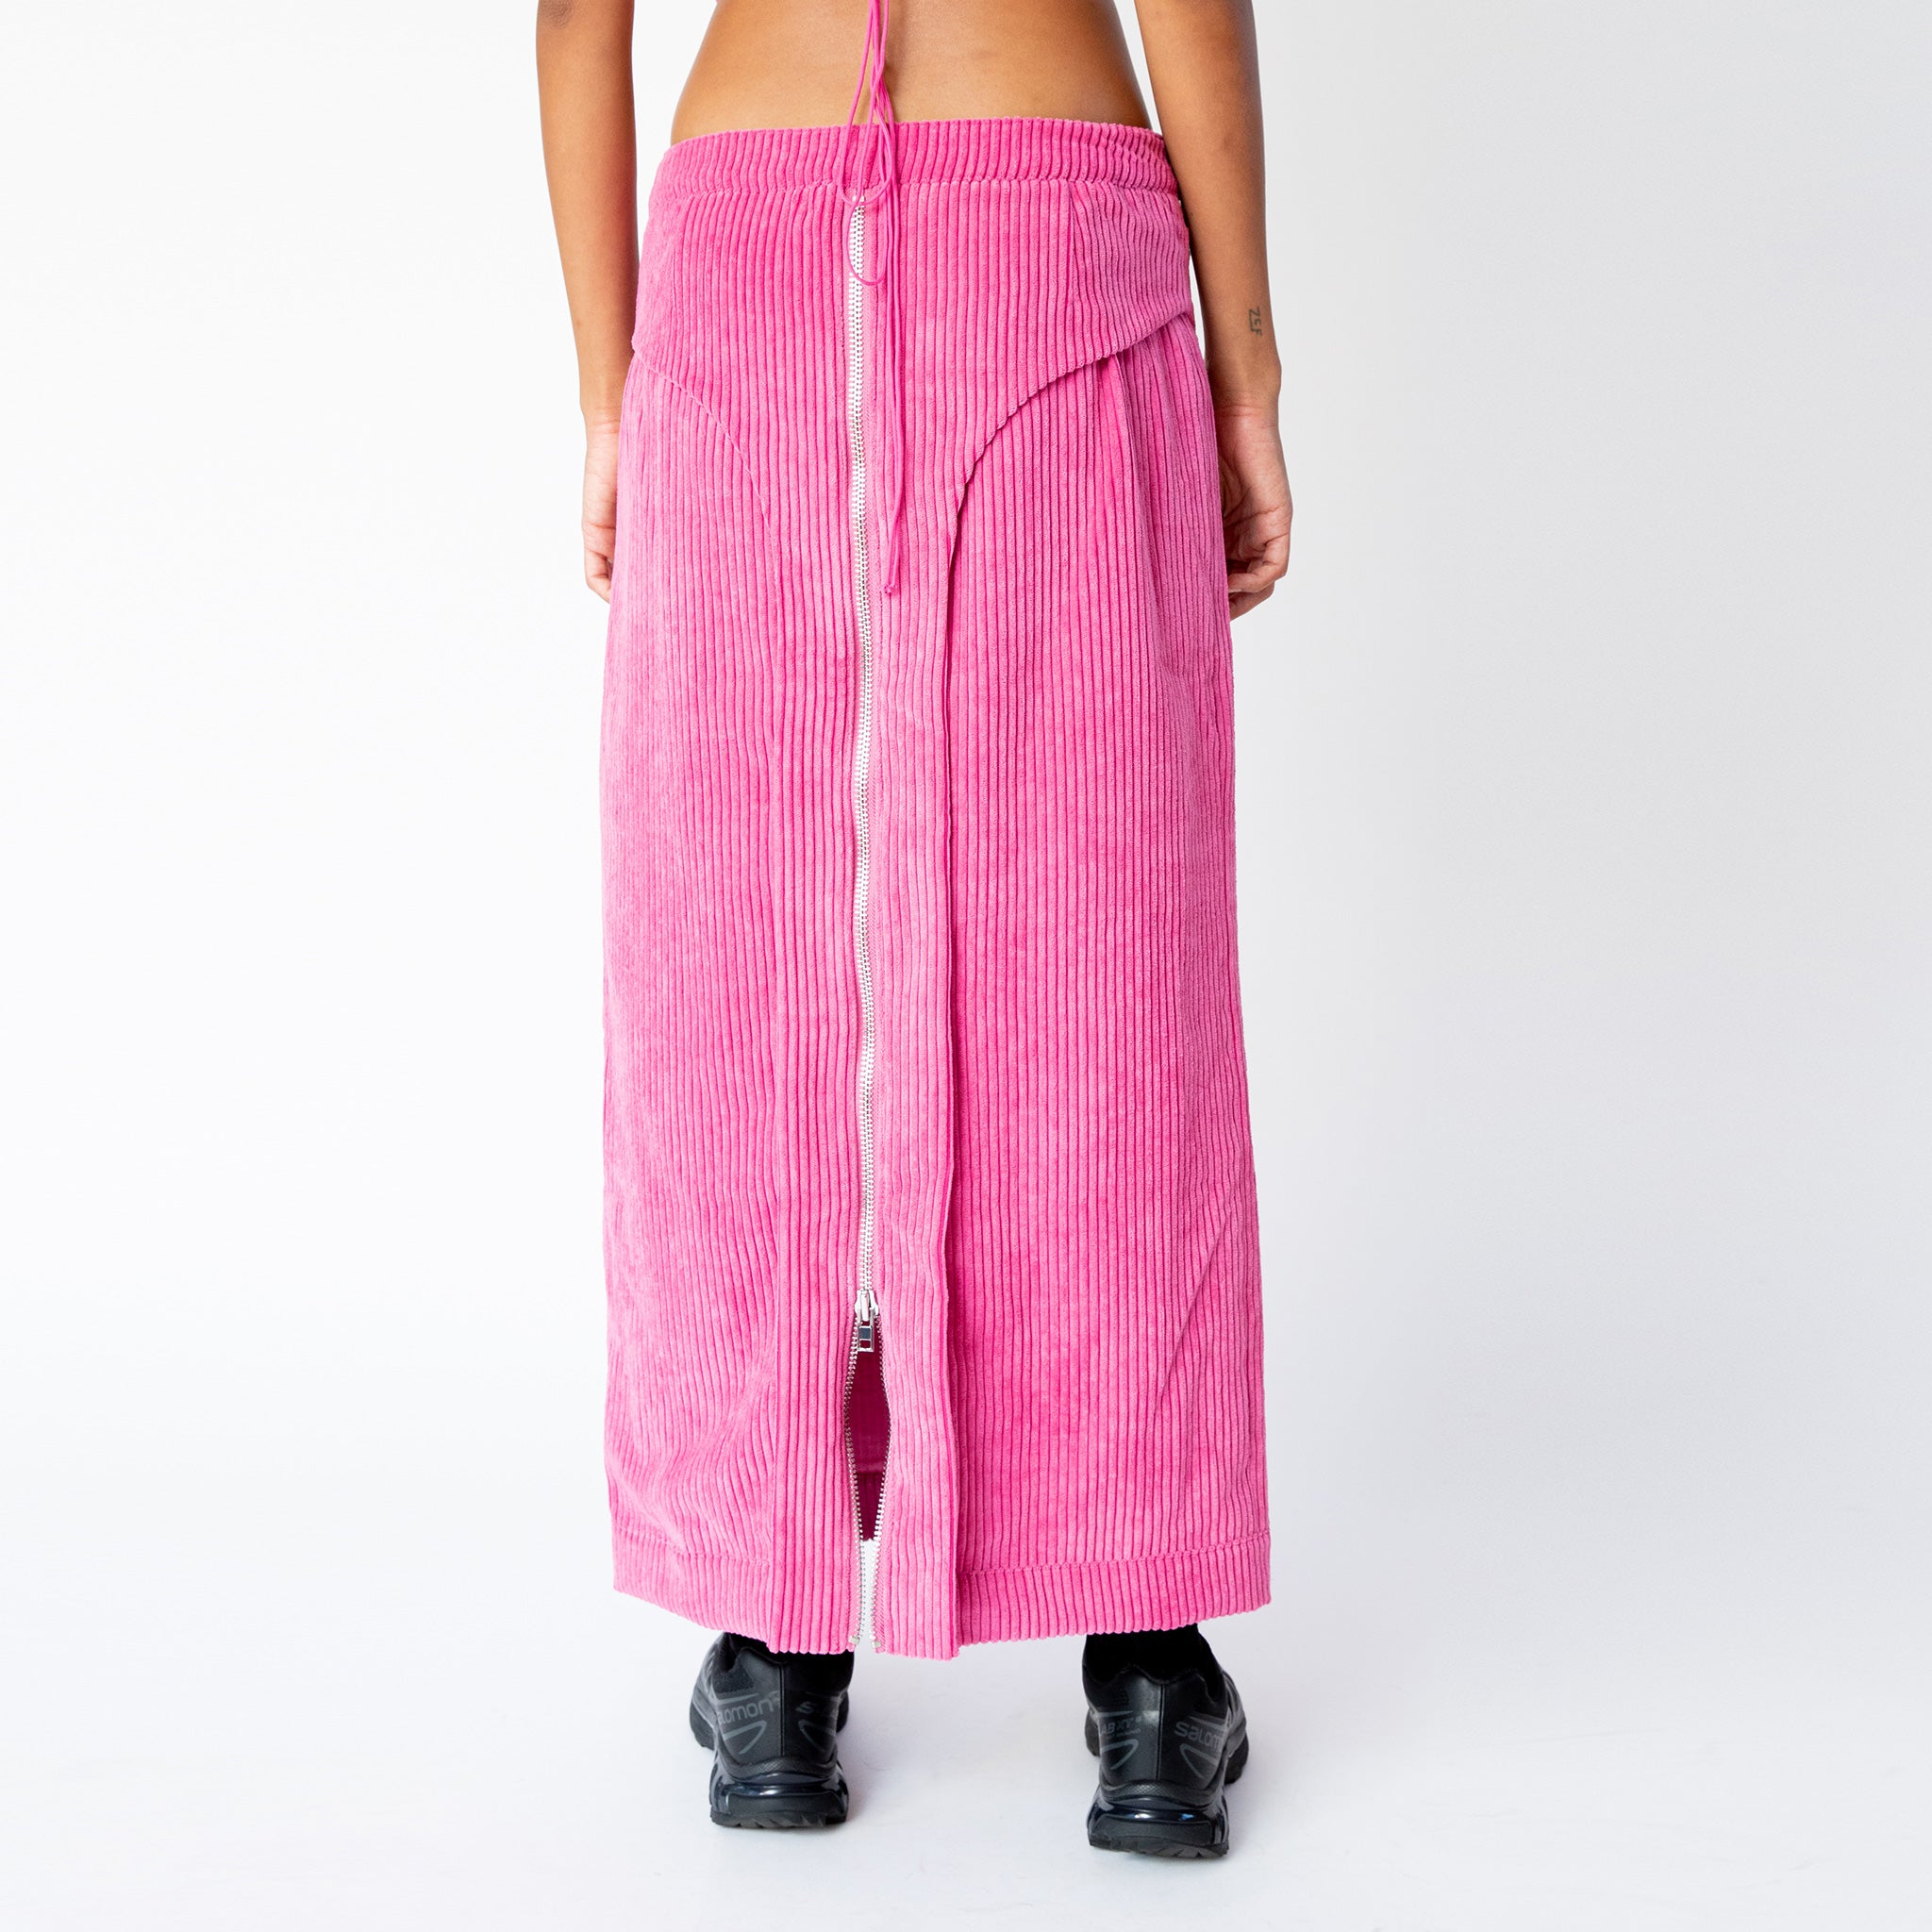 A model wears the full length pink corduroy Cord Zip Skirt by Eckhaus Latta, with full length silver front zipper and 3 front waistband button snaps, paired here with black sneakers - back view.